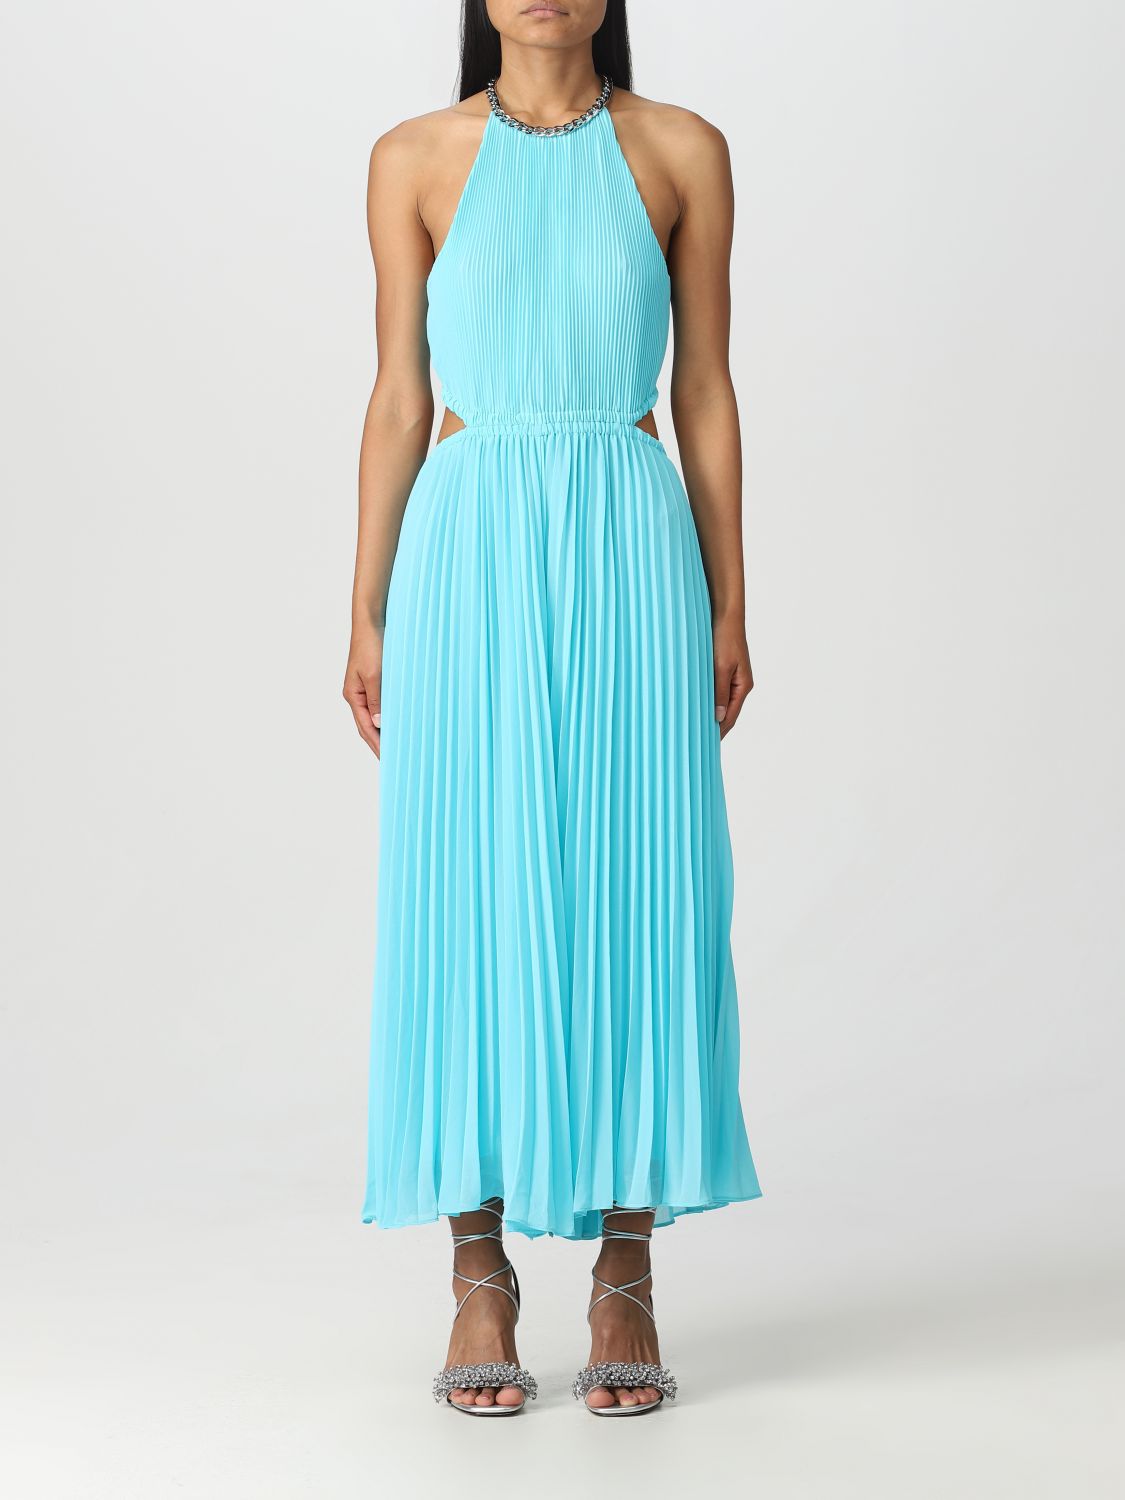 Michael Kors Dress  Woman In Turquoise